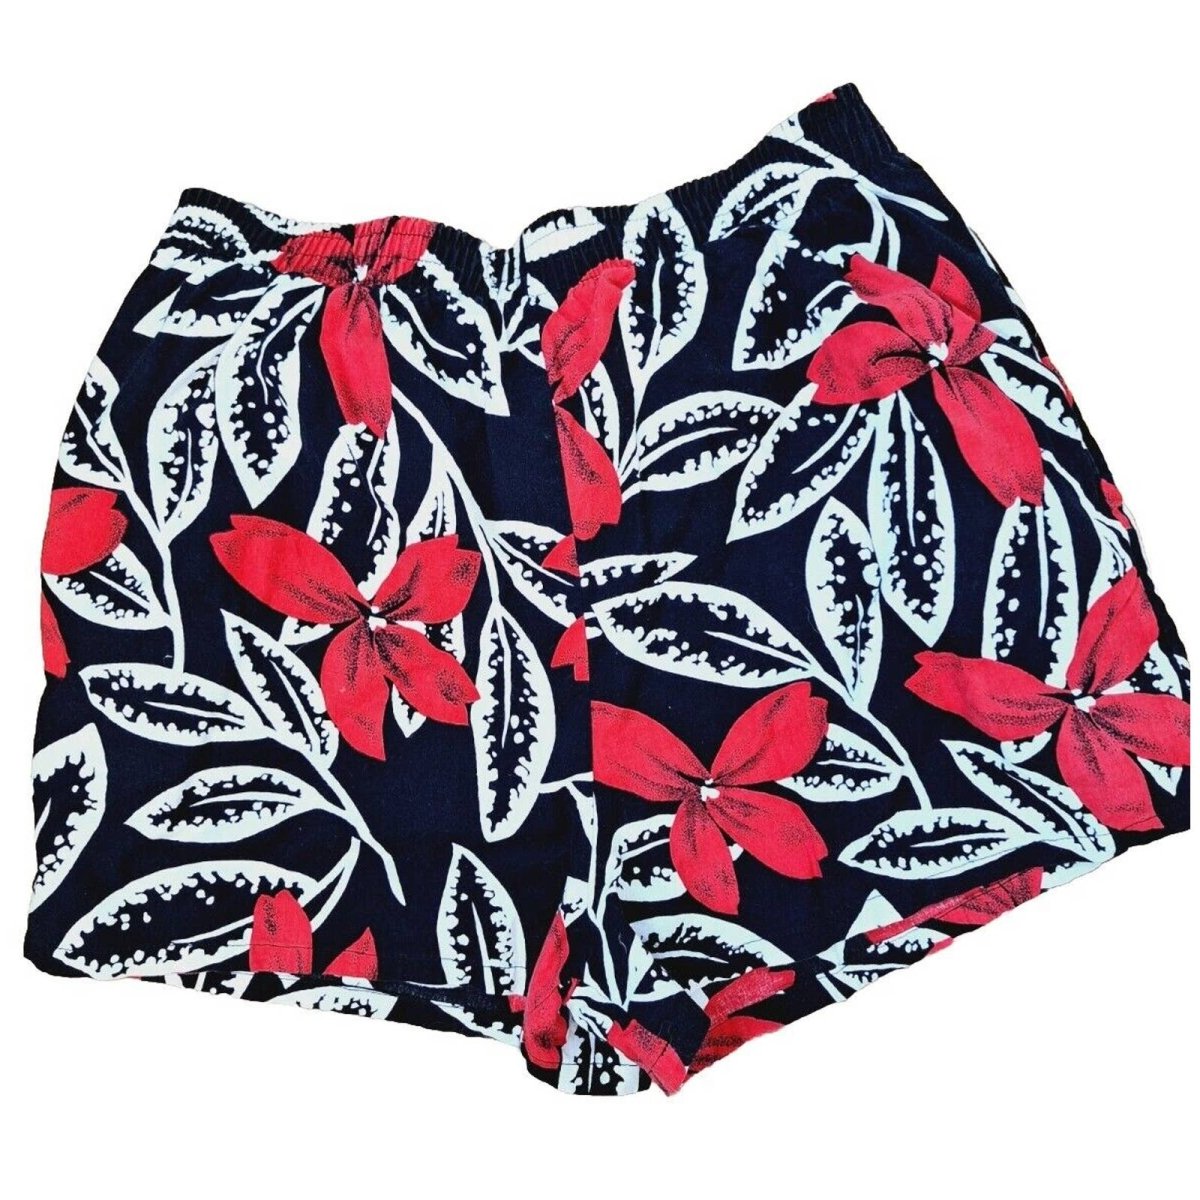 Vintage 80s/90s Black Red Floral Shorts Size Medium - themallvintage The Mall Vintage